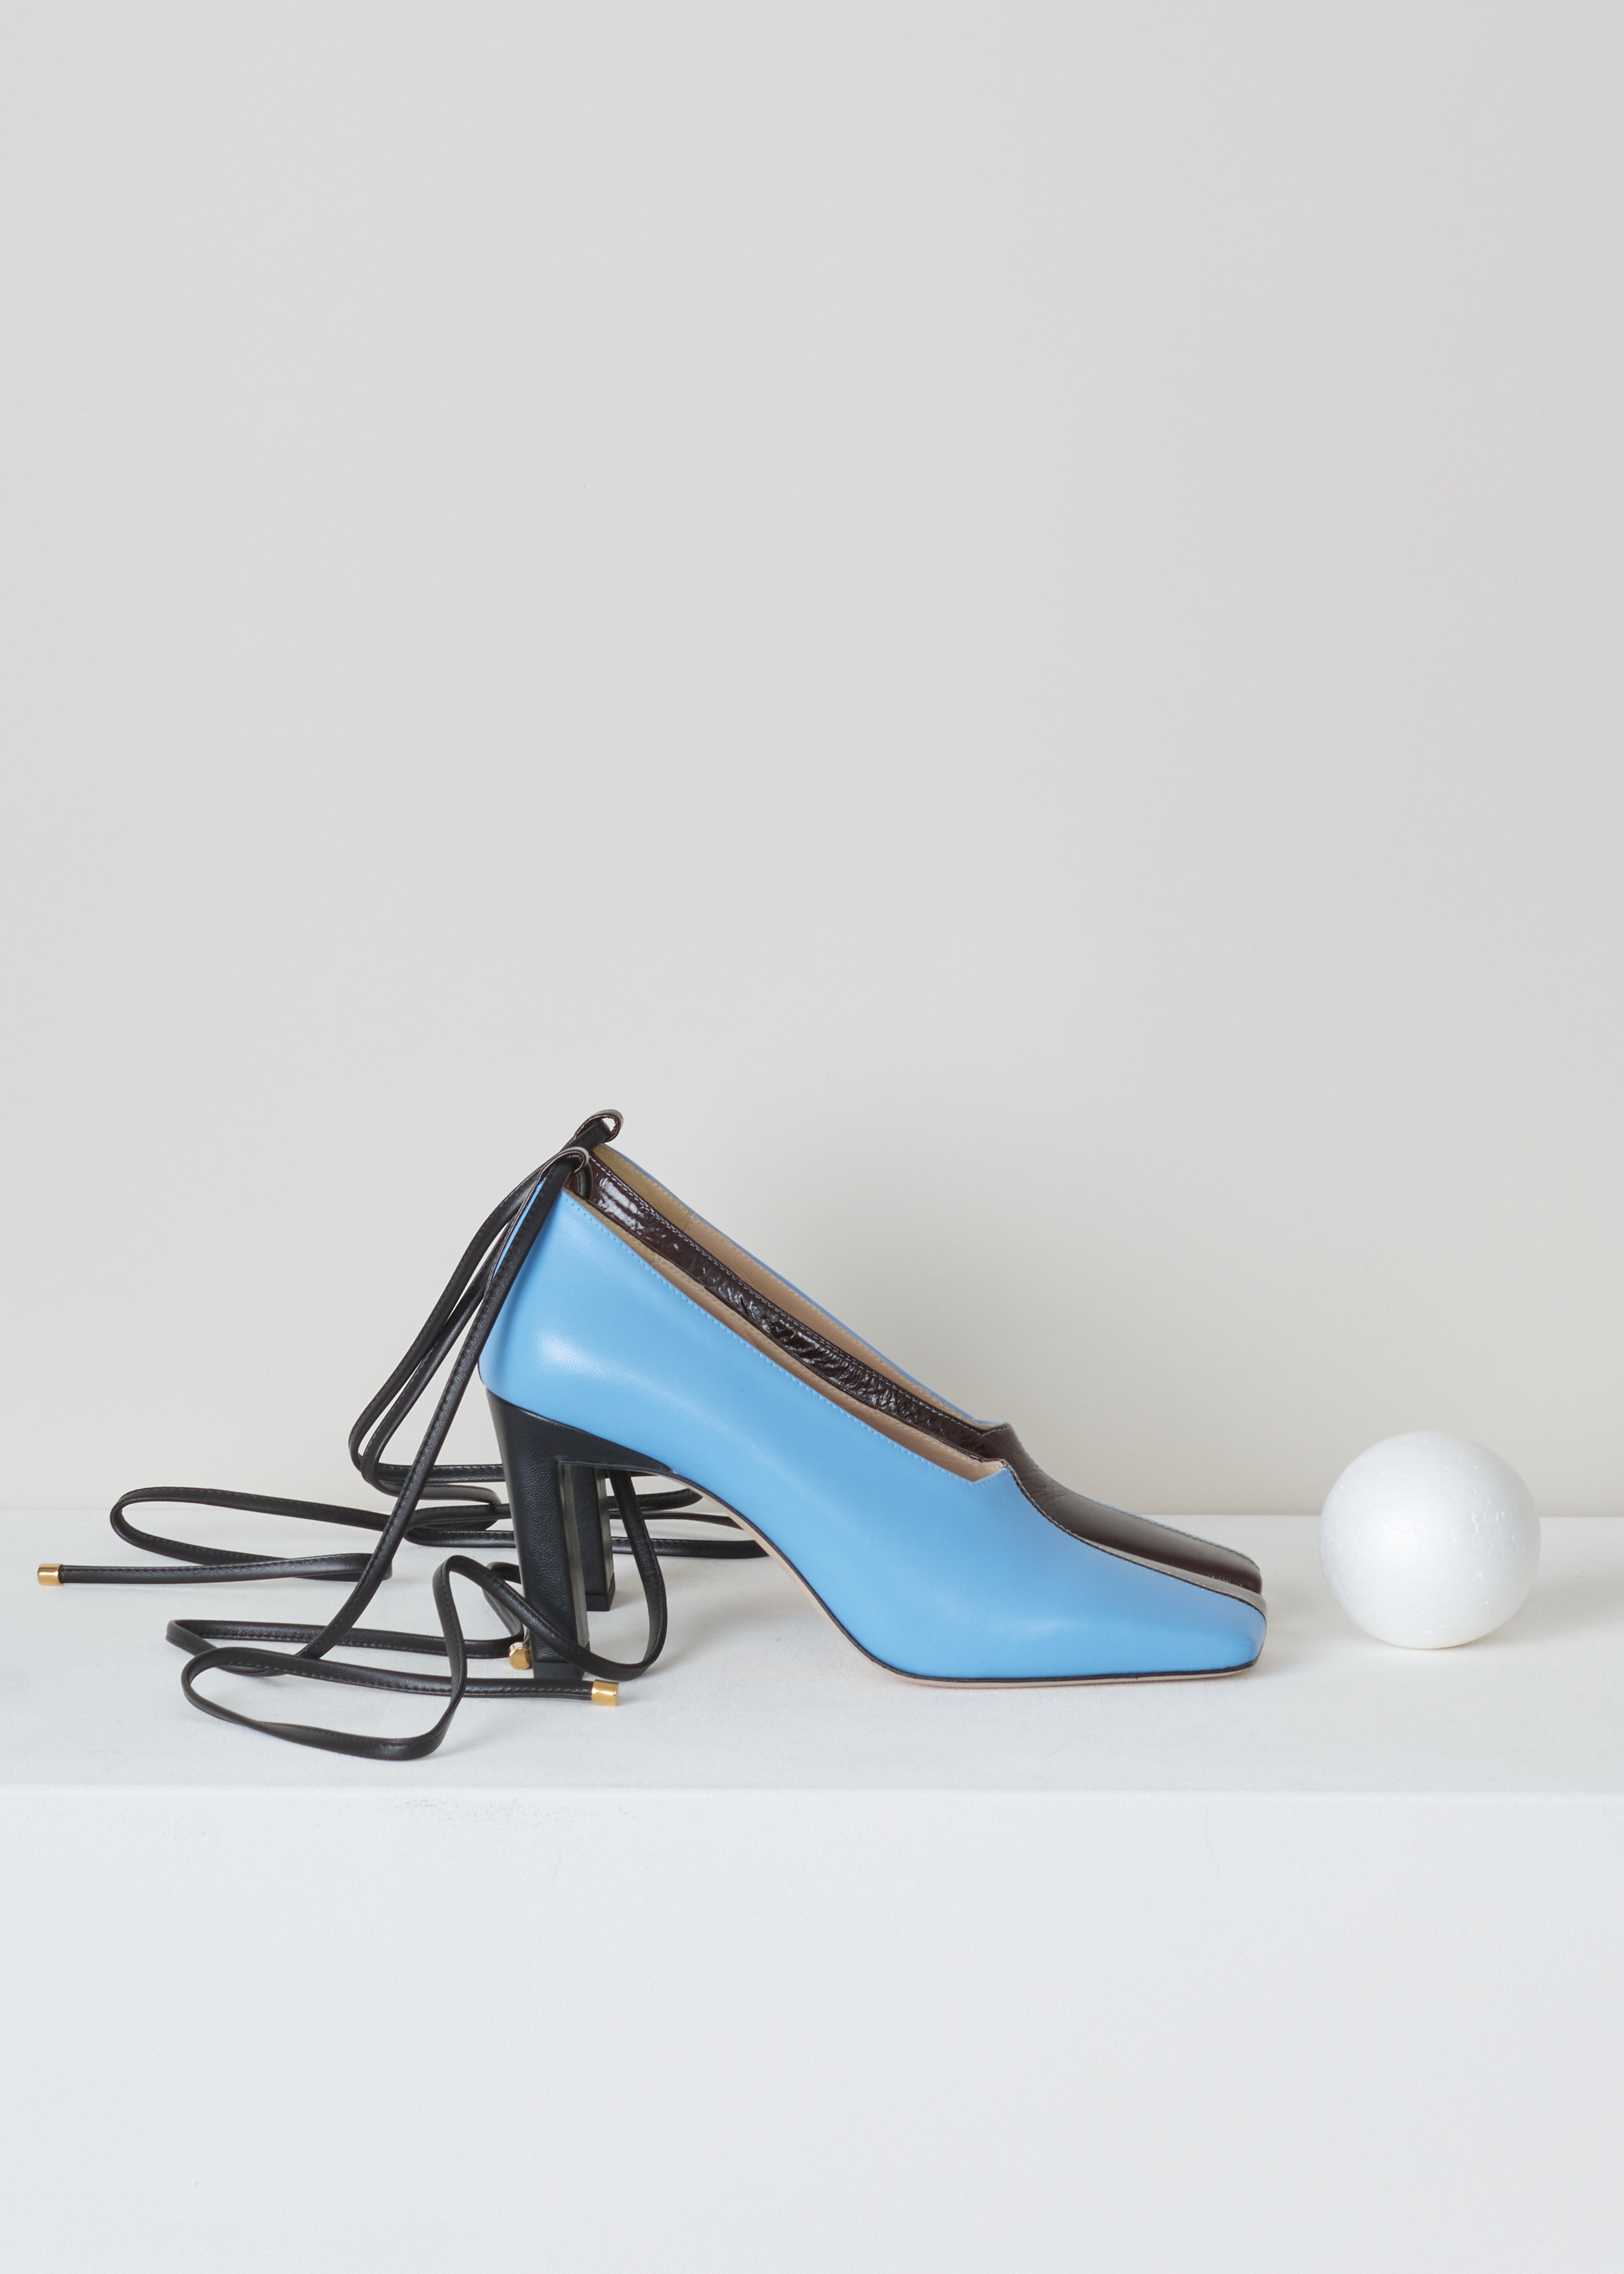 Wandler Isa mule ISA_MULE_RAISIN_MIX raisin mix side. Isa mule in raisin mix with a bold architectural shape, a chic square toe, half blue, half brown. It has a wrap tie ankle fastening and high block heel.

Heel height: 8.5 cm / 3.4 inch.